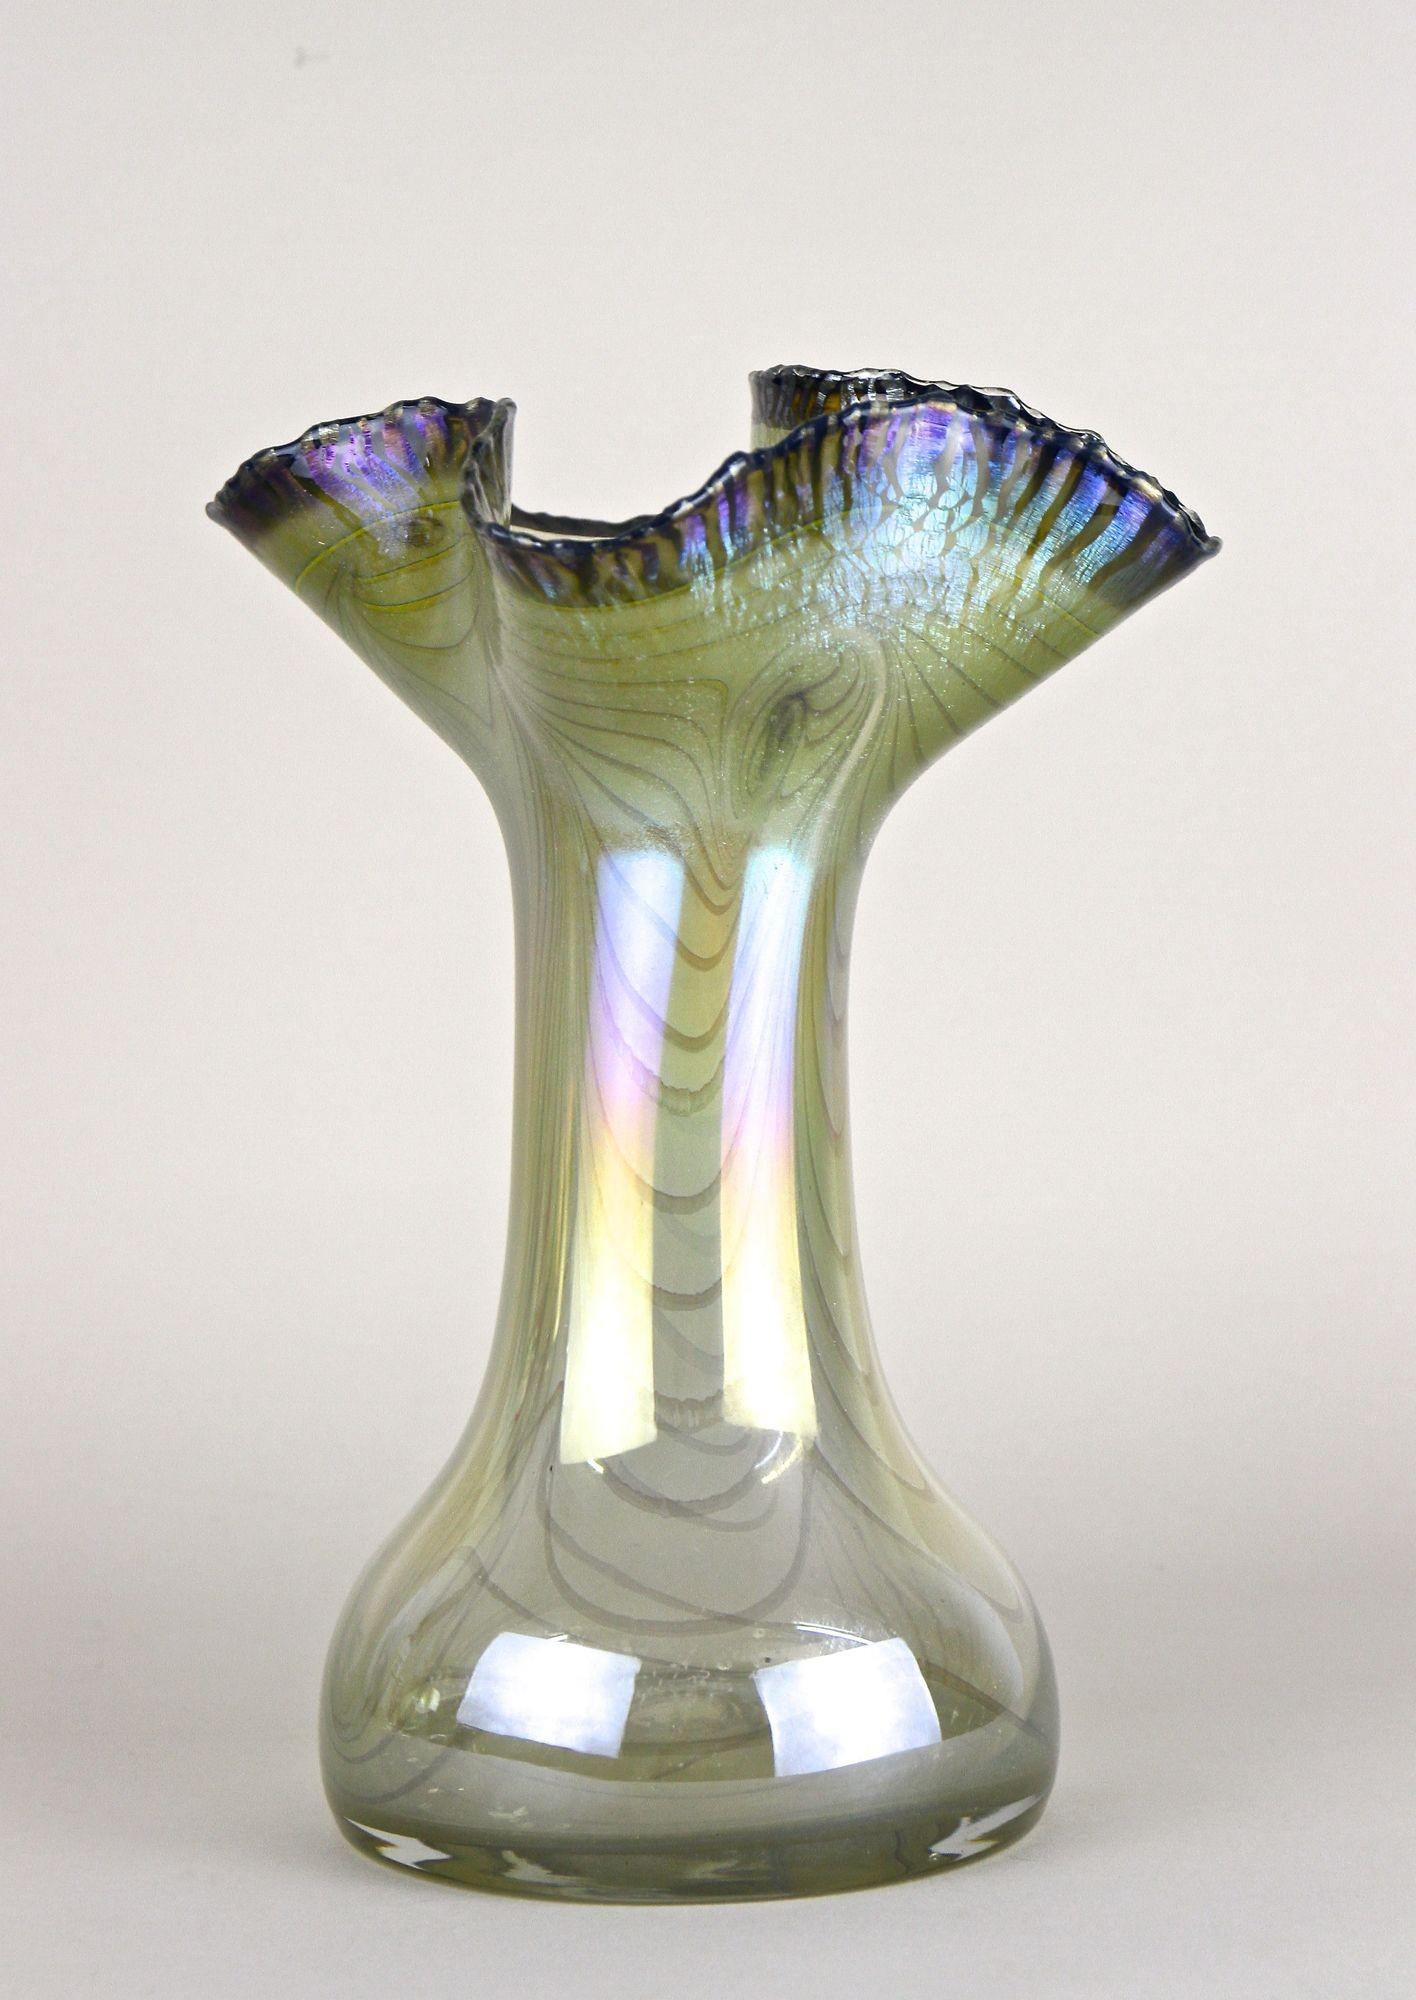 20th Century Iridescent Glass Vase by E. Eisch - Signed, Germany 1982 For Sale 5